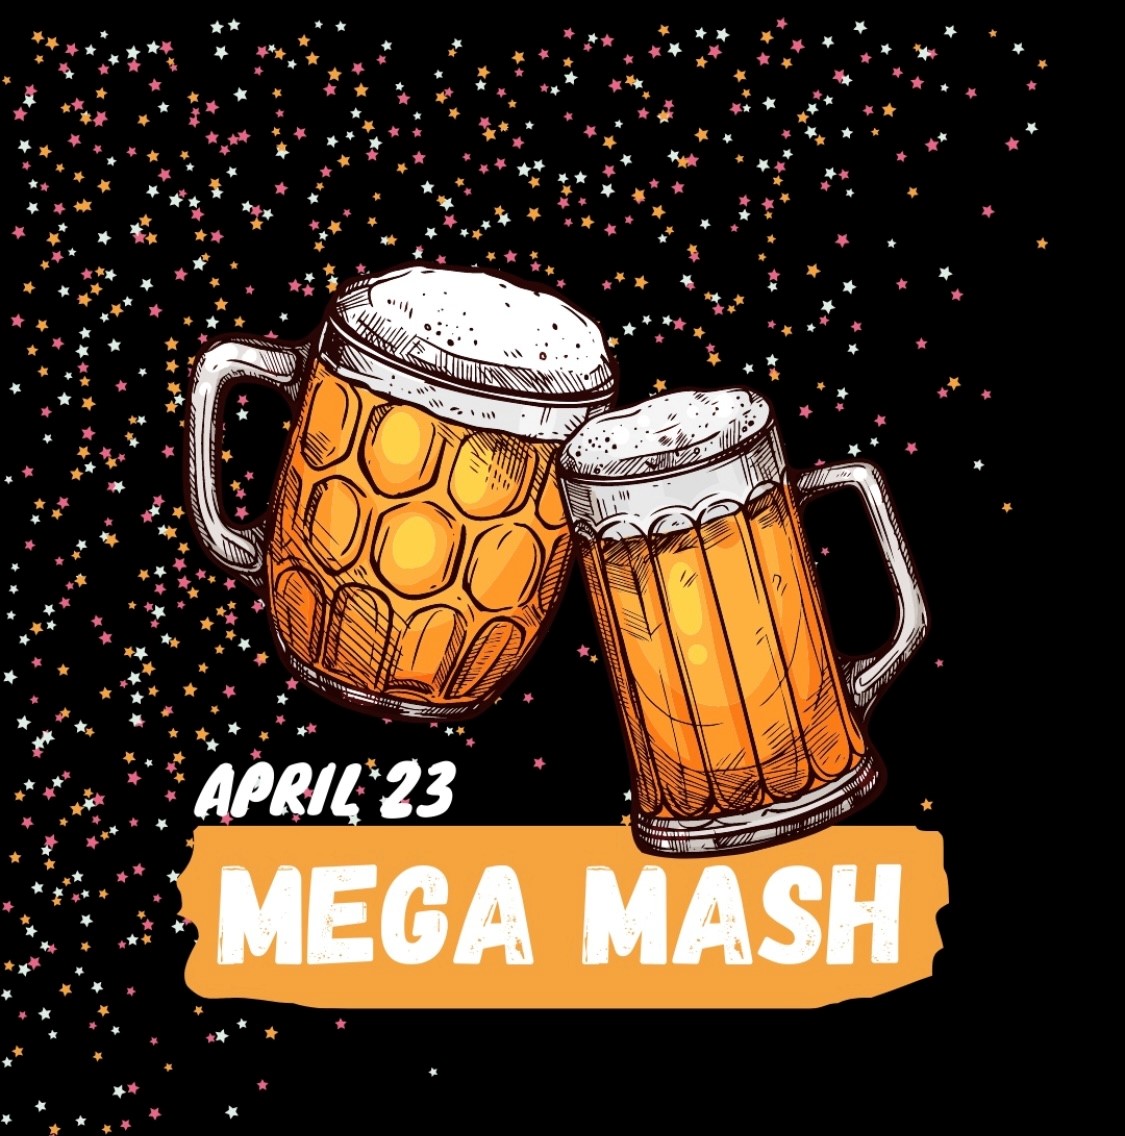 1/2

Thinking about getting in on #MEGAMASH, but you're not sure? DON'T WAIT! WE'RE LESS THAN 2 WEEKS AWAY & SELLLING FAST!
(Formerly known as #BIGBREW) MEGAMASH is on Apr 23 - reserve carboy fills NOW!
As always, @alleykatbeer is generously allowing us to use their equipment ..